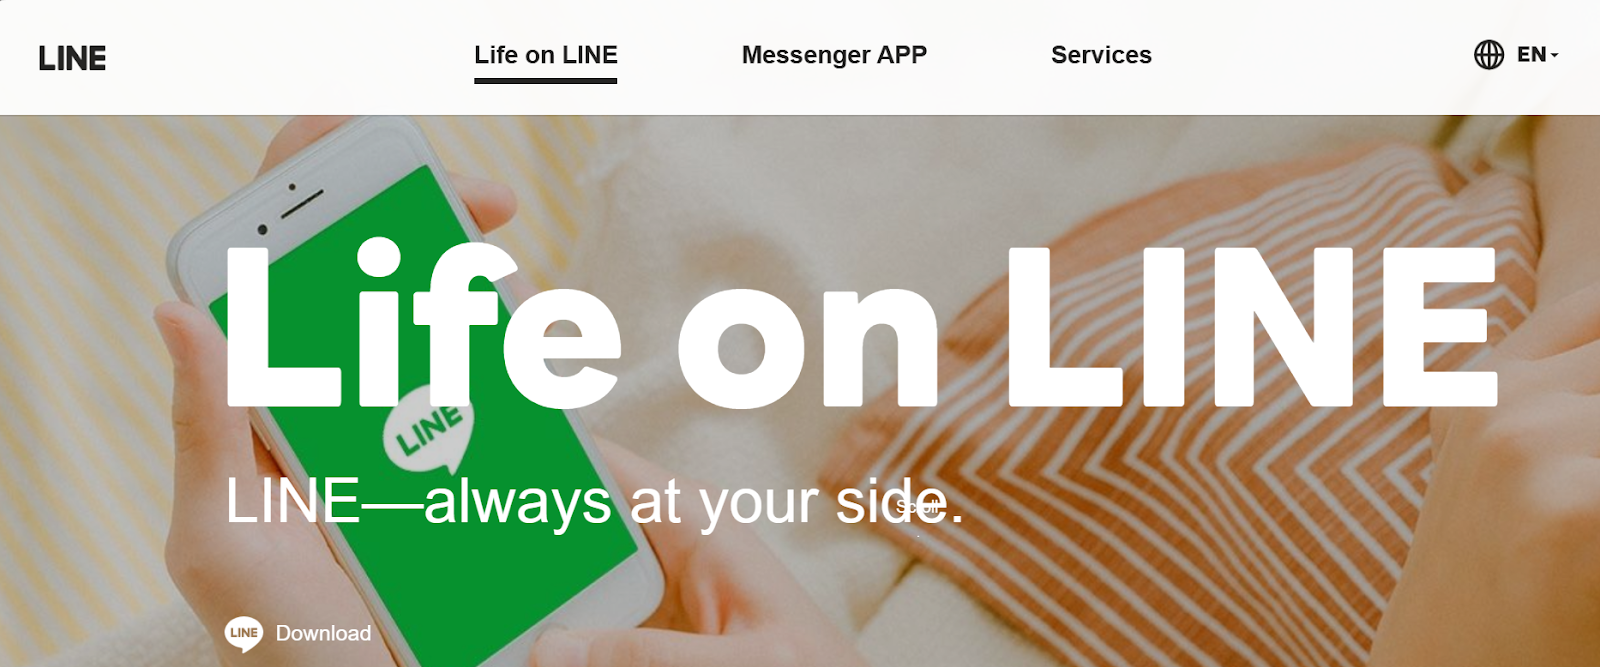 Line website snapshot highlighting the services it offers.